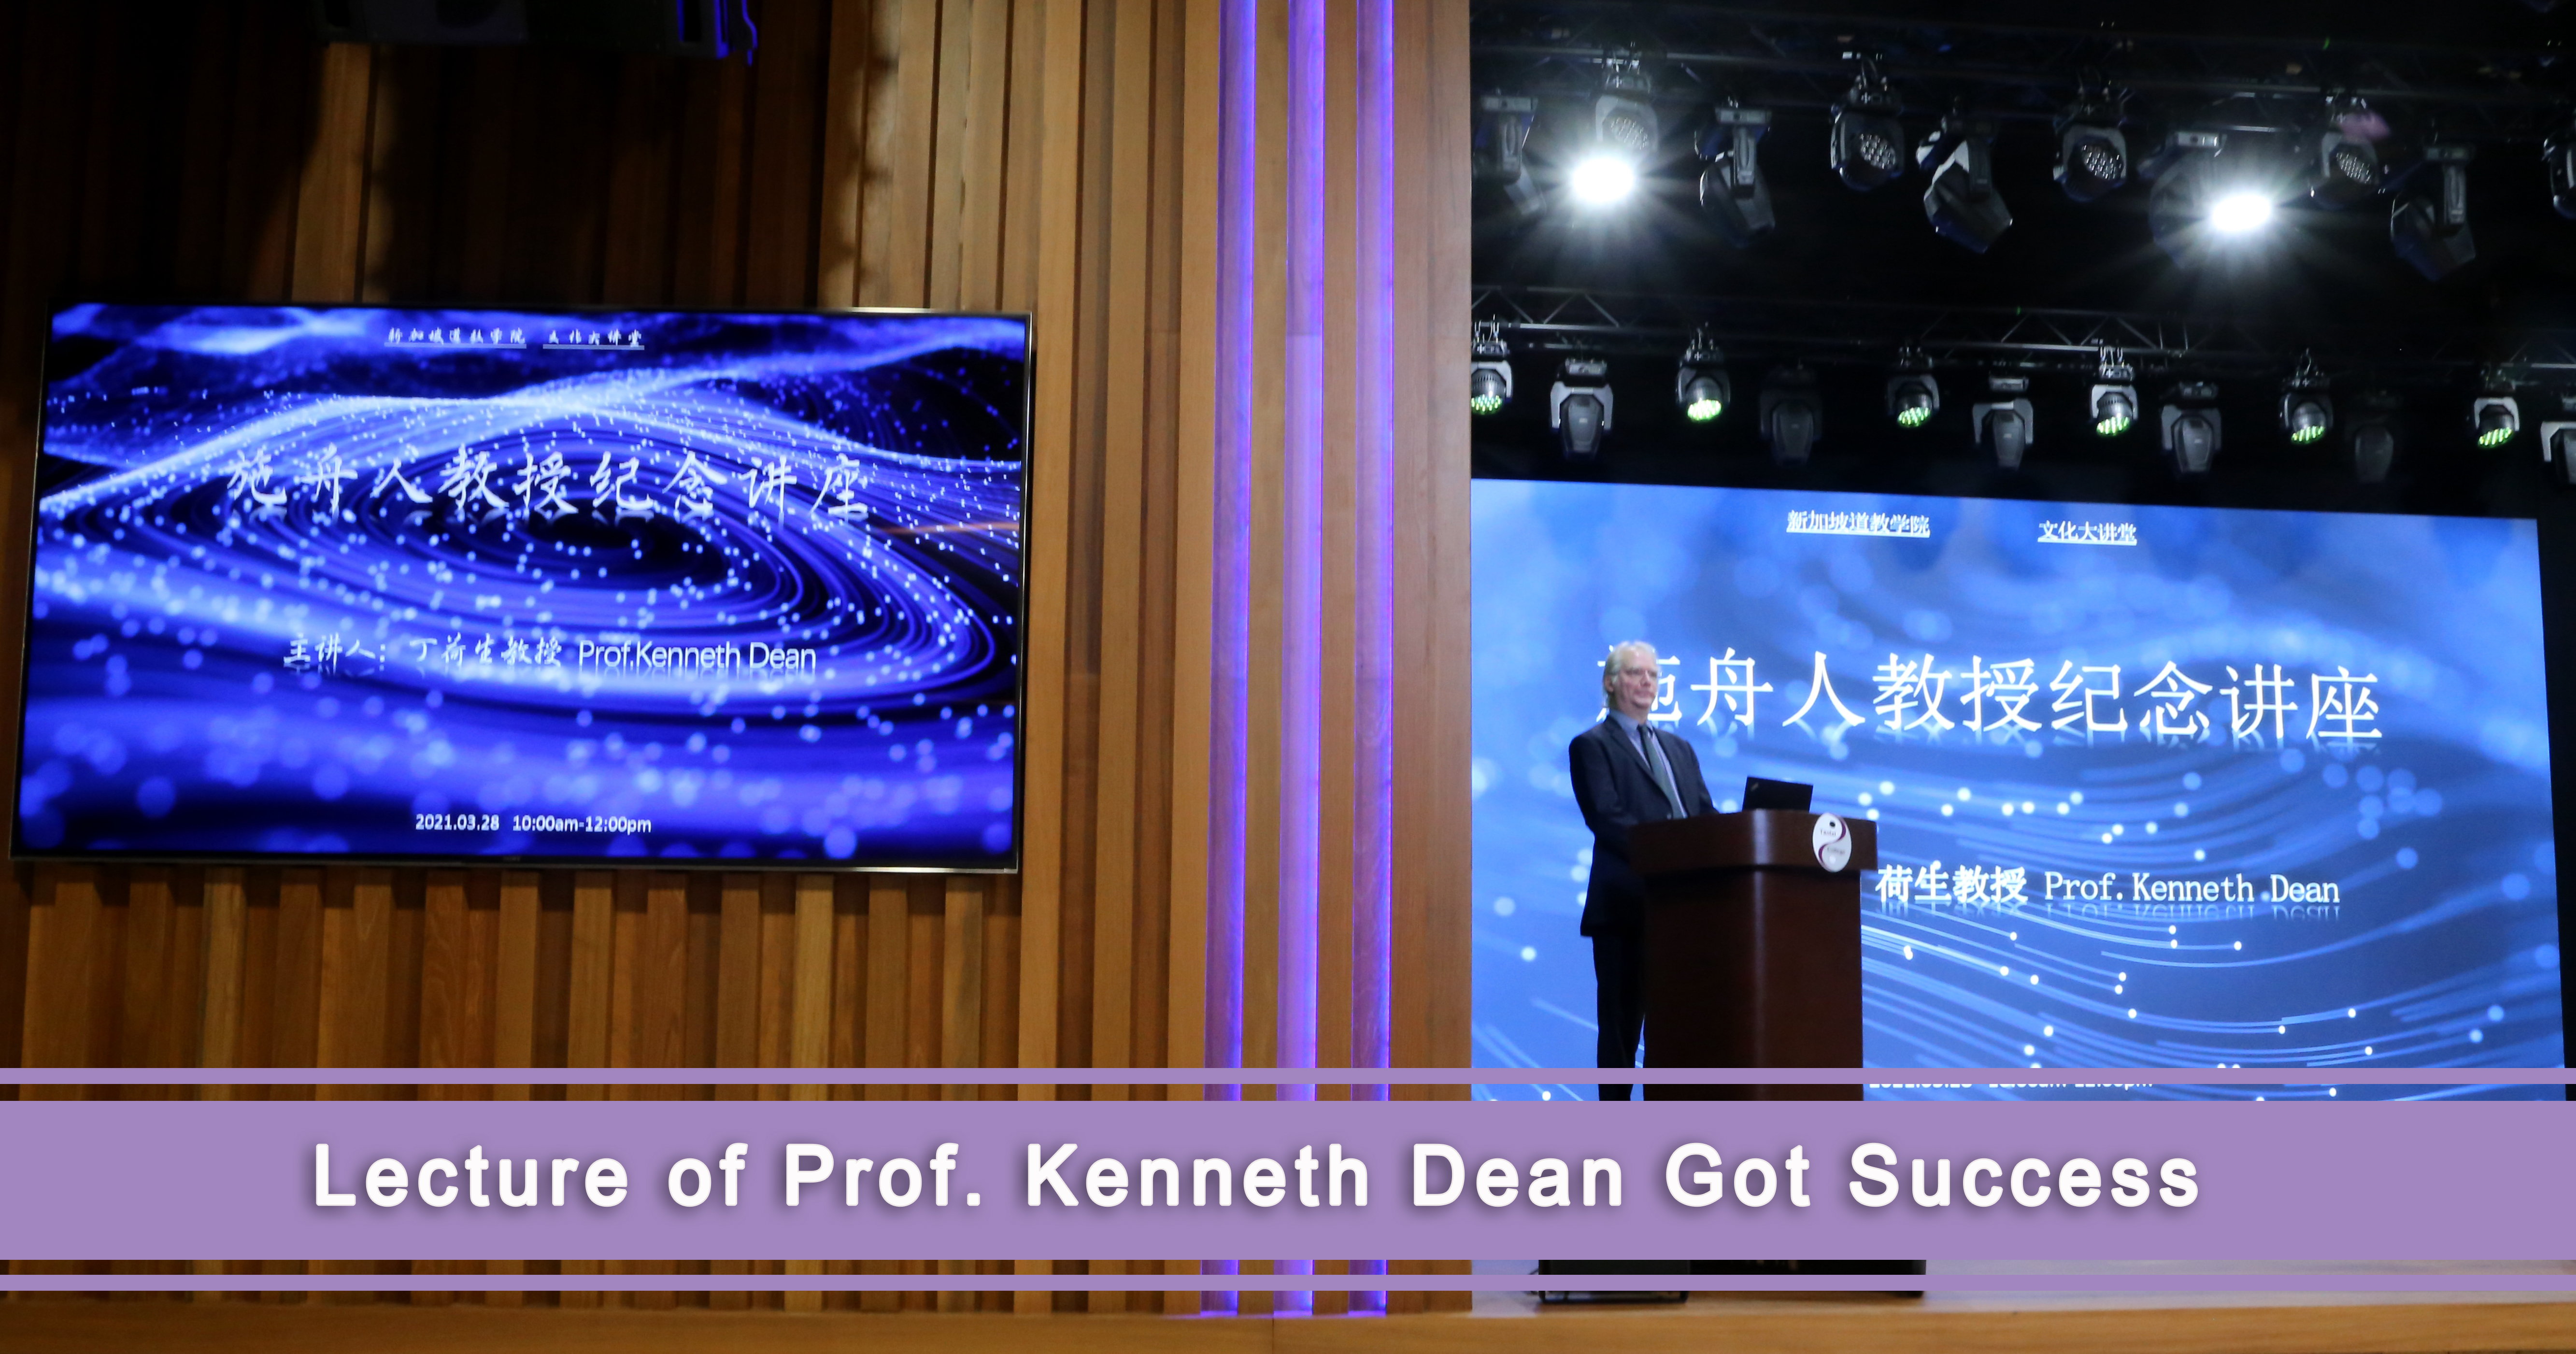 Lecture of Prof. Kenneth Dean Got Success